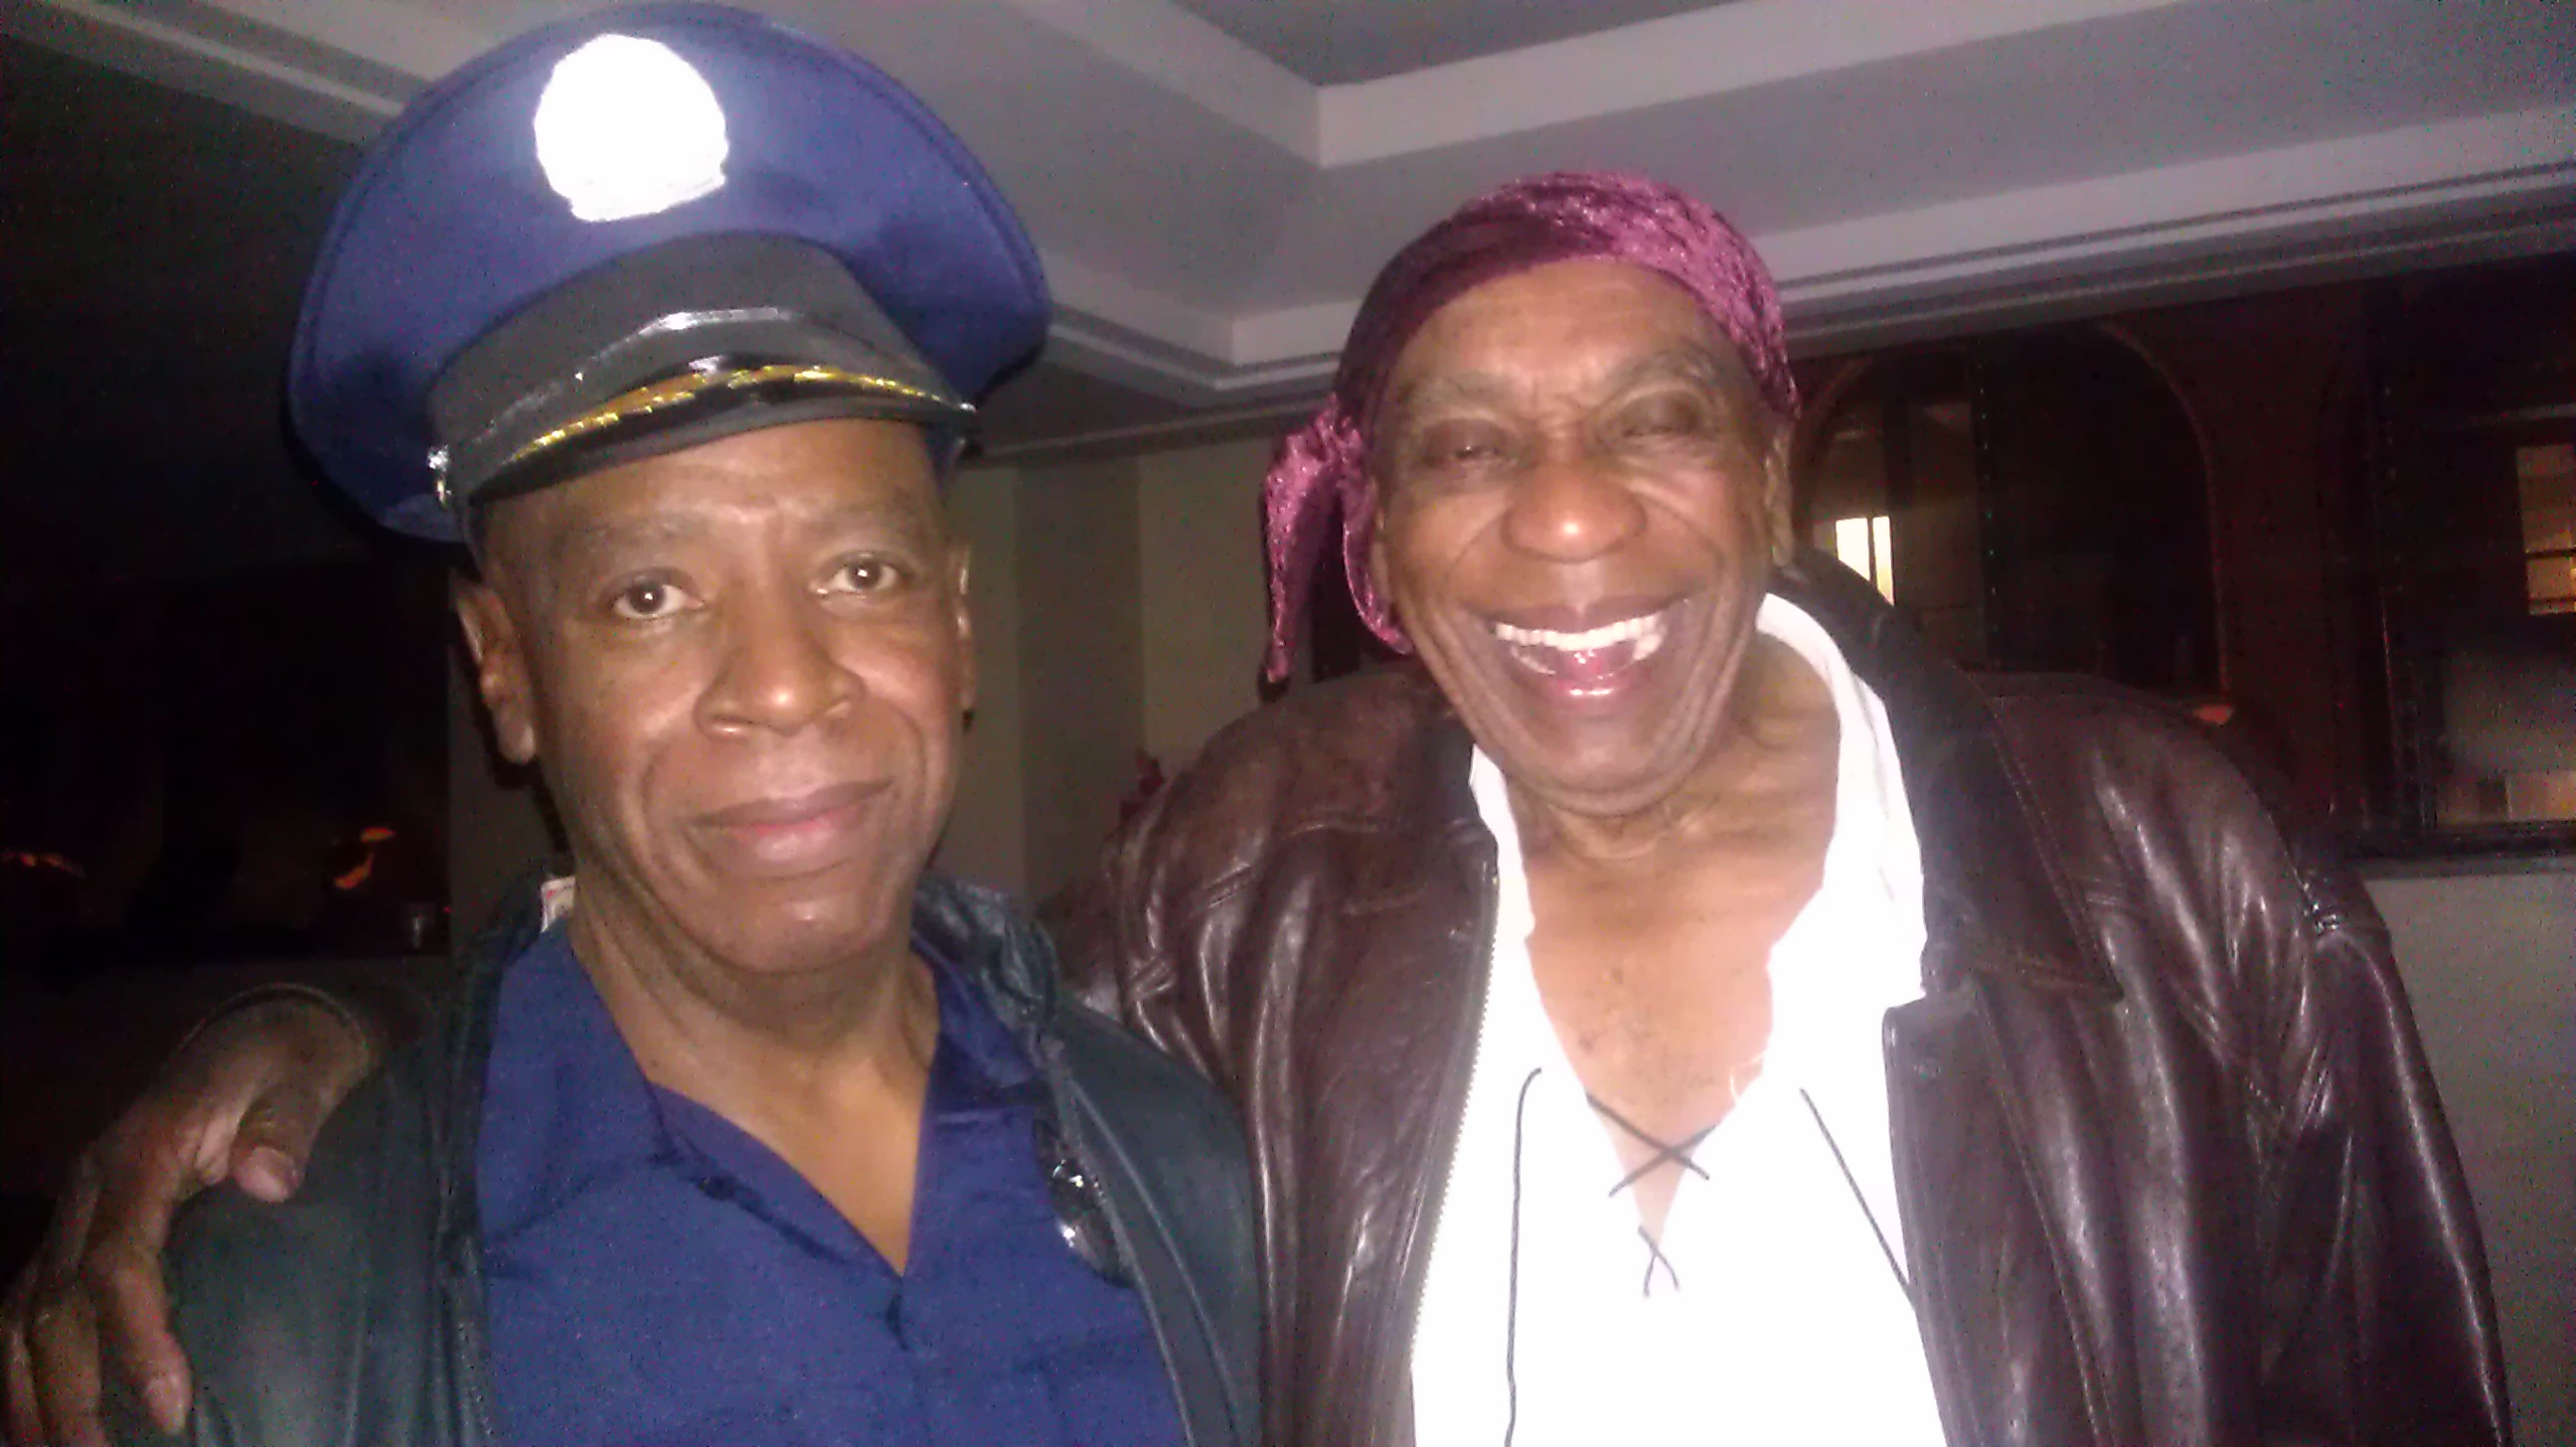 Actor Bill Cobbs and myself at the KNB Halloween Party in 2011. I was Bill Cobbs stand-in and photo double on the movie 